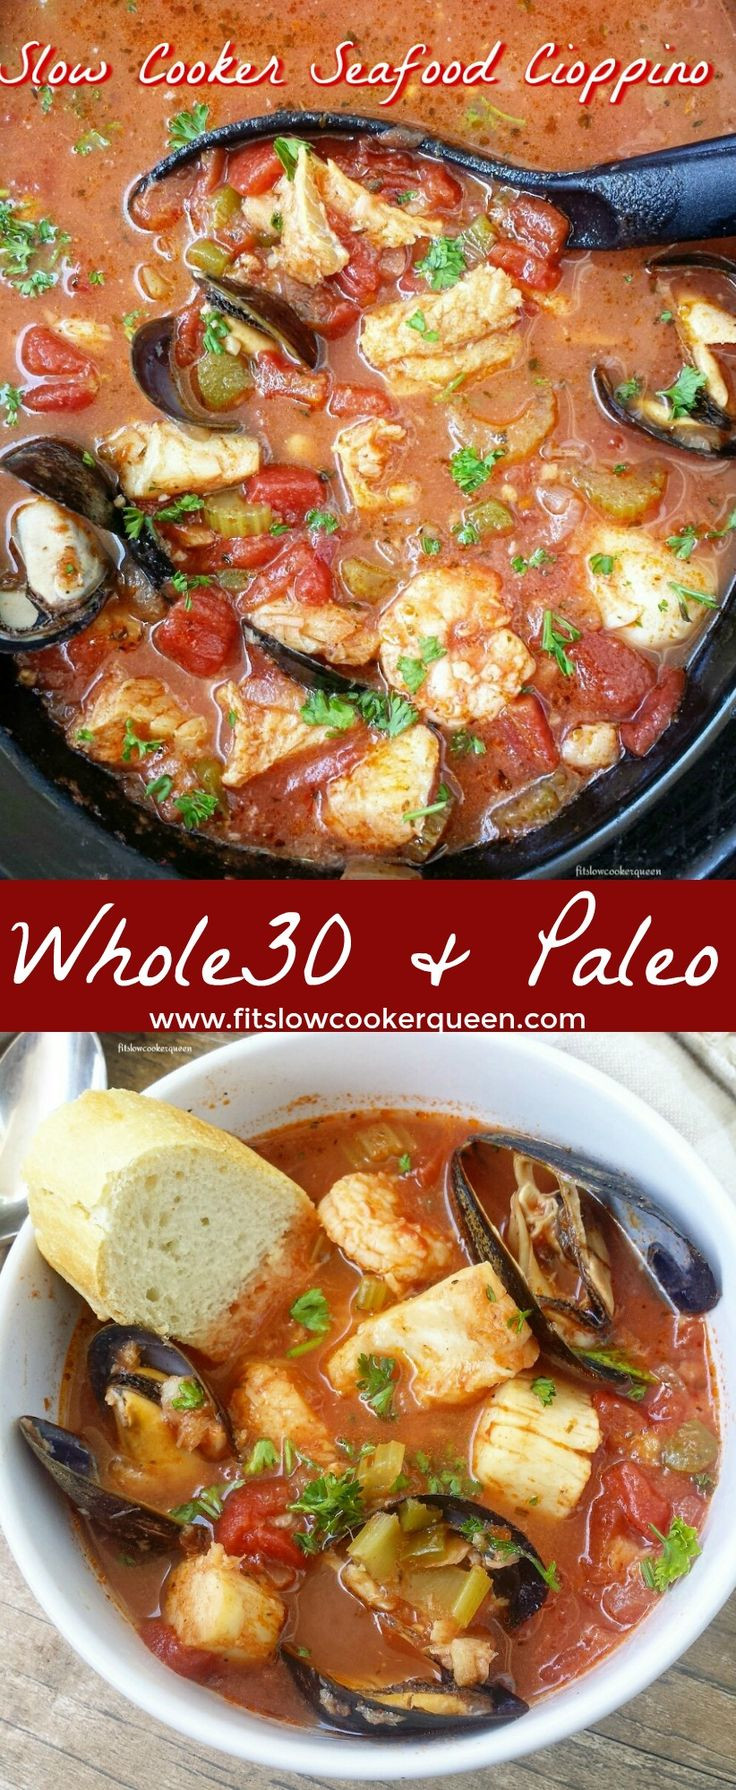 Healthy Seafood Slow Cooker Recipes
 246 best images about Fit SlowCooker Queen Recipes on